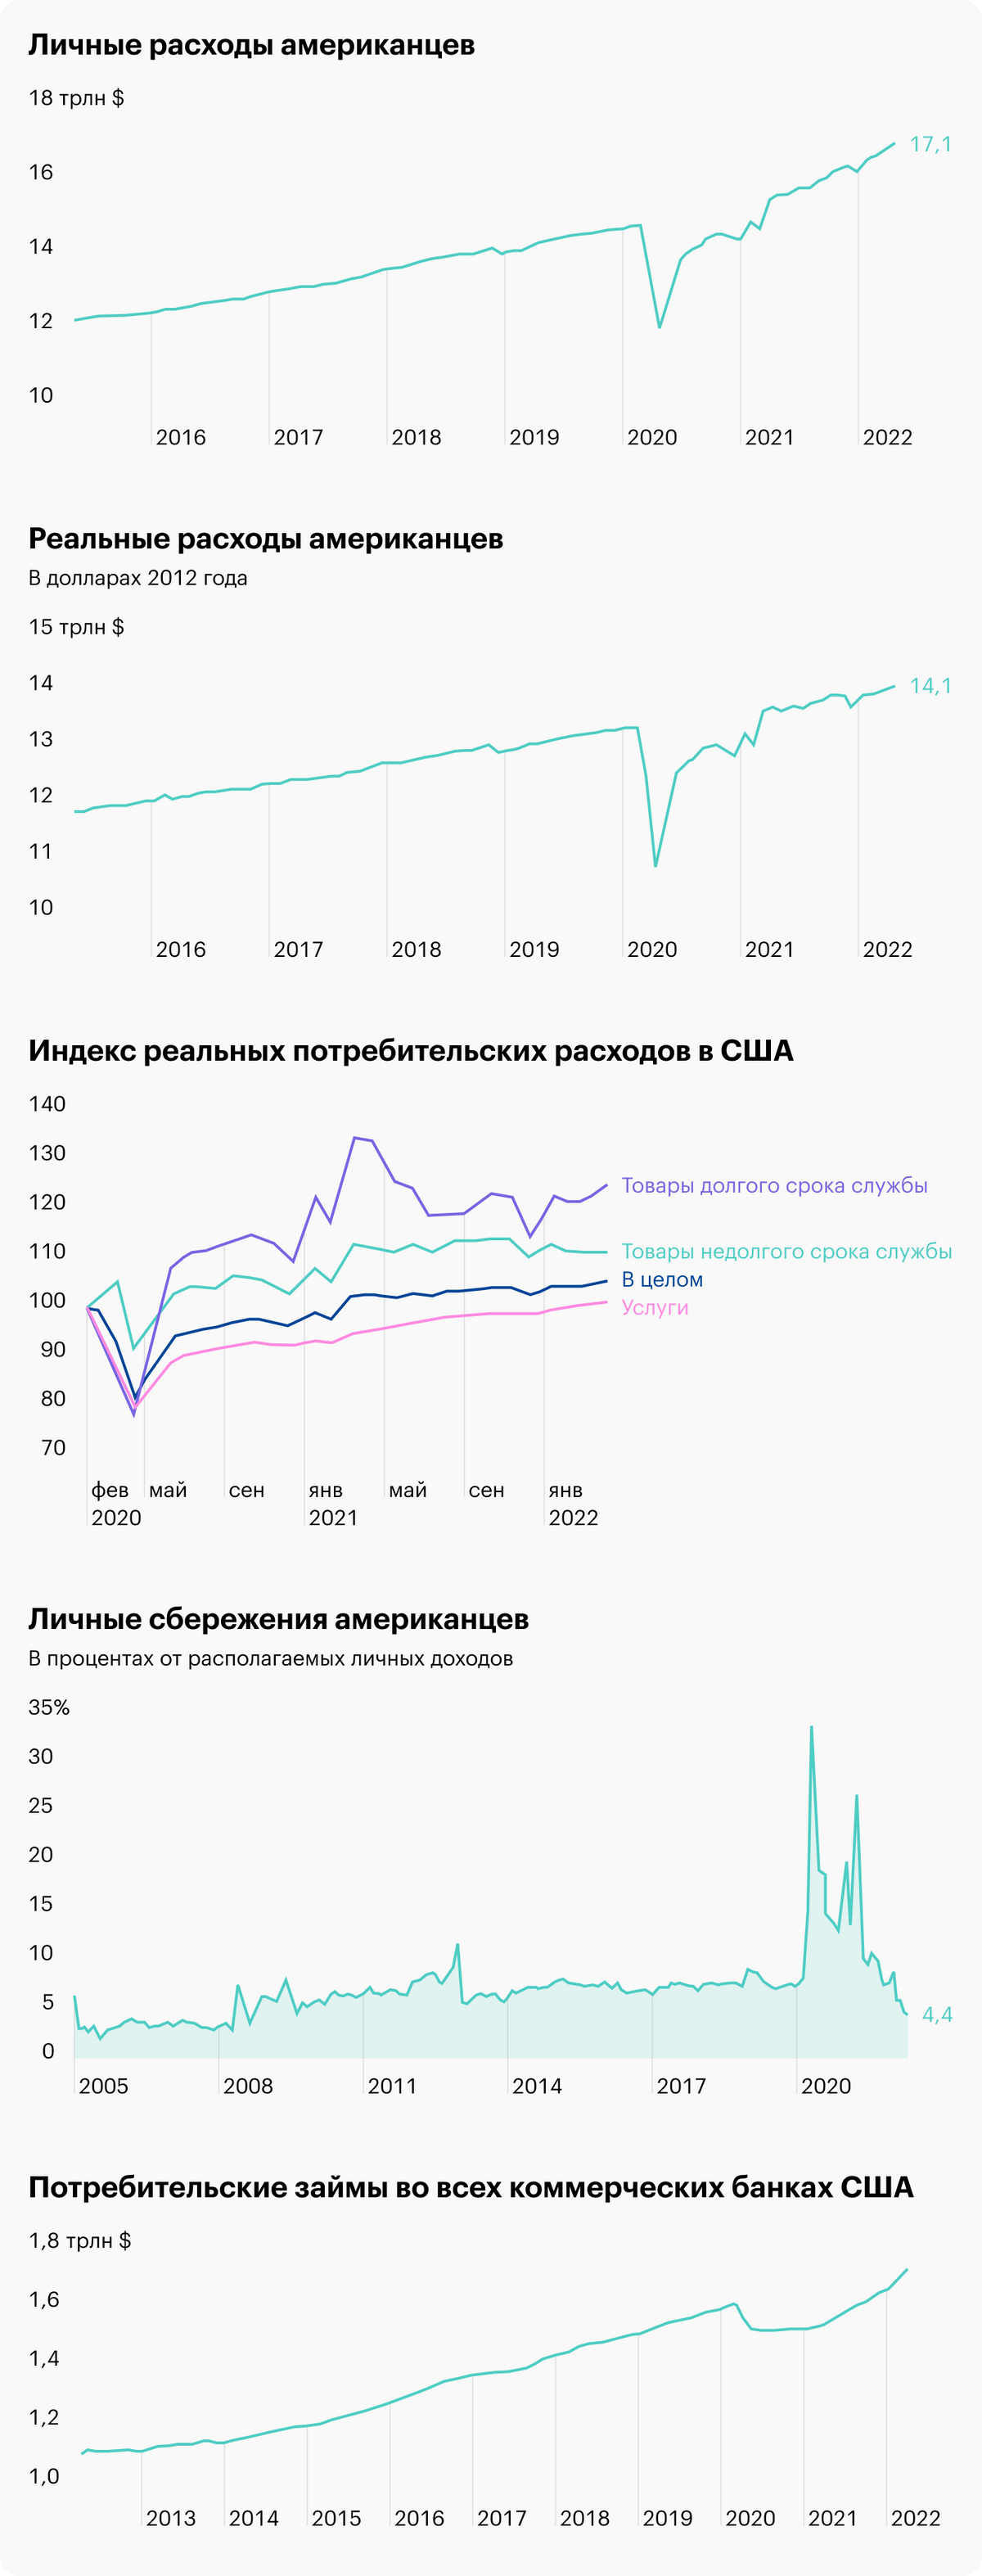 Источник: Daily Shot, Consumer spending, Spending on services, Consumers dipped into their savings, ФРС США